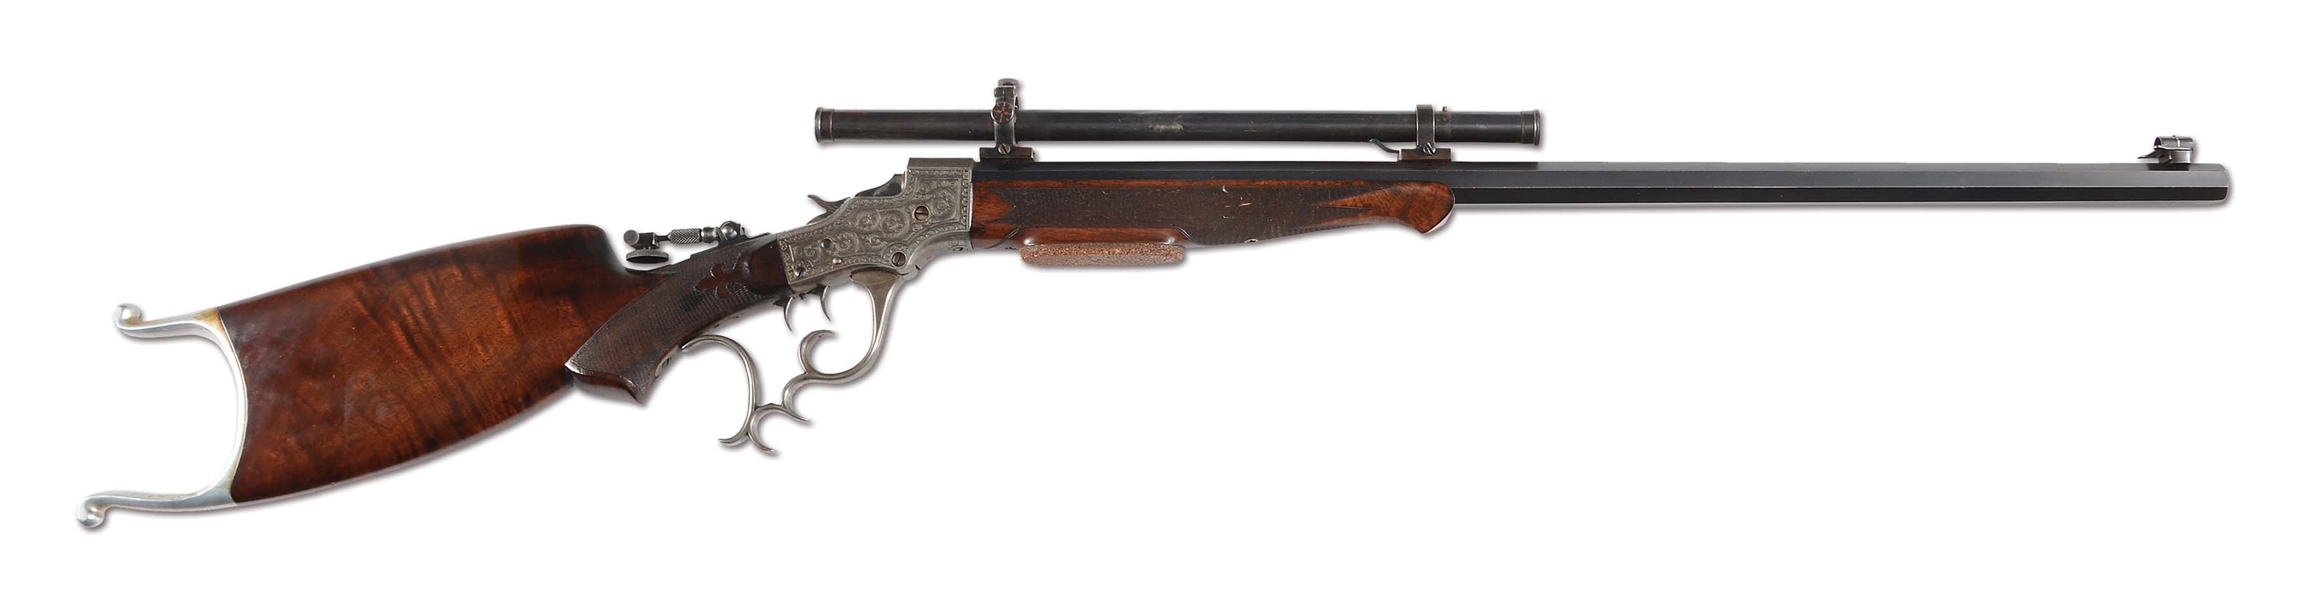 (C) STEVENS POPE FACTORY ENGRAVED STYLE NO. 52 FALLING BLOCK SINGLE SHOT RIFLE WITH SCOPE.